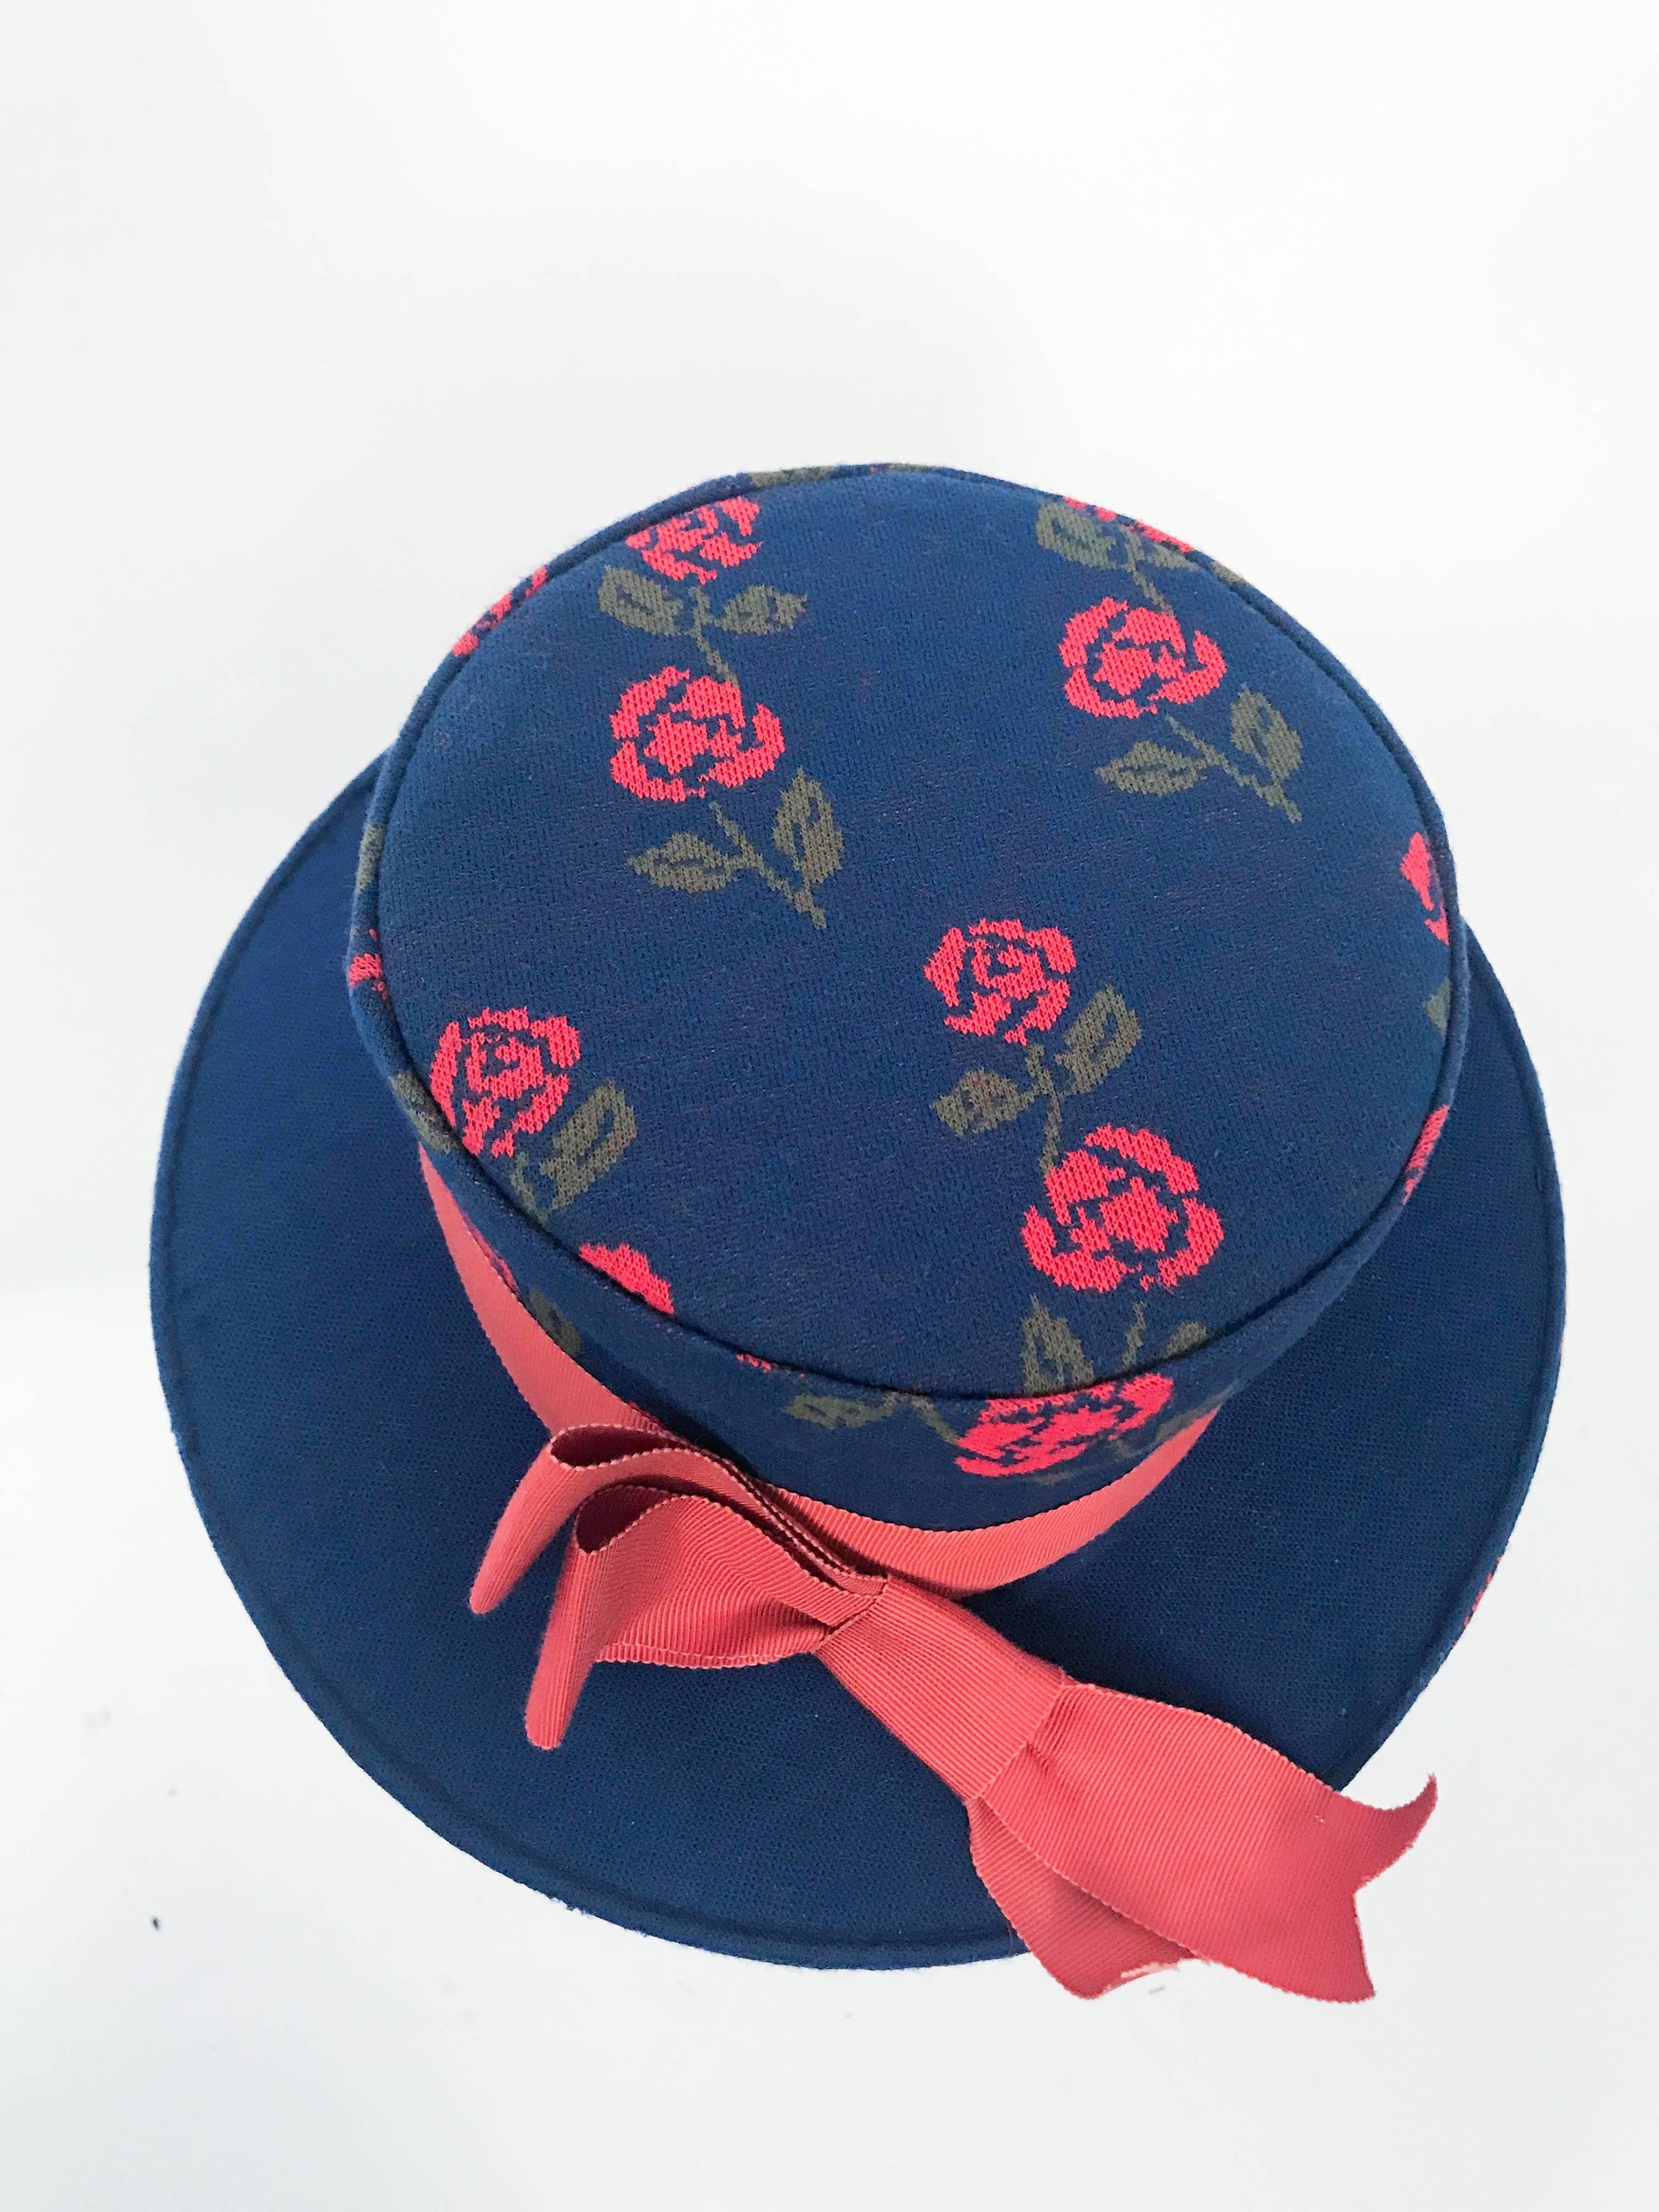 1960s Blue Woven Rose Hat with Rust Hat Band and Bow. Blue woven handmade boater hat with rust colored hatband and bow. Lining of red satin. Could be worn perched over the top of the head.